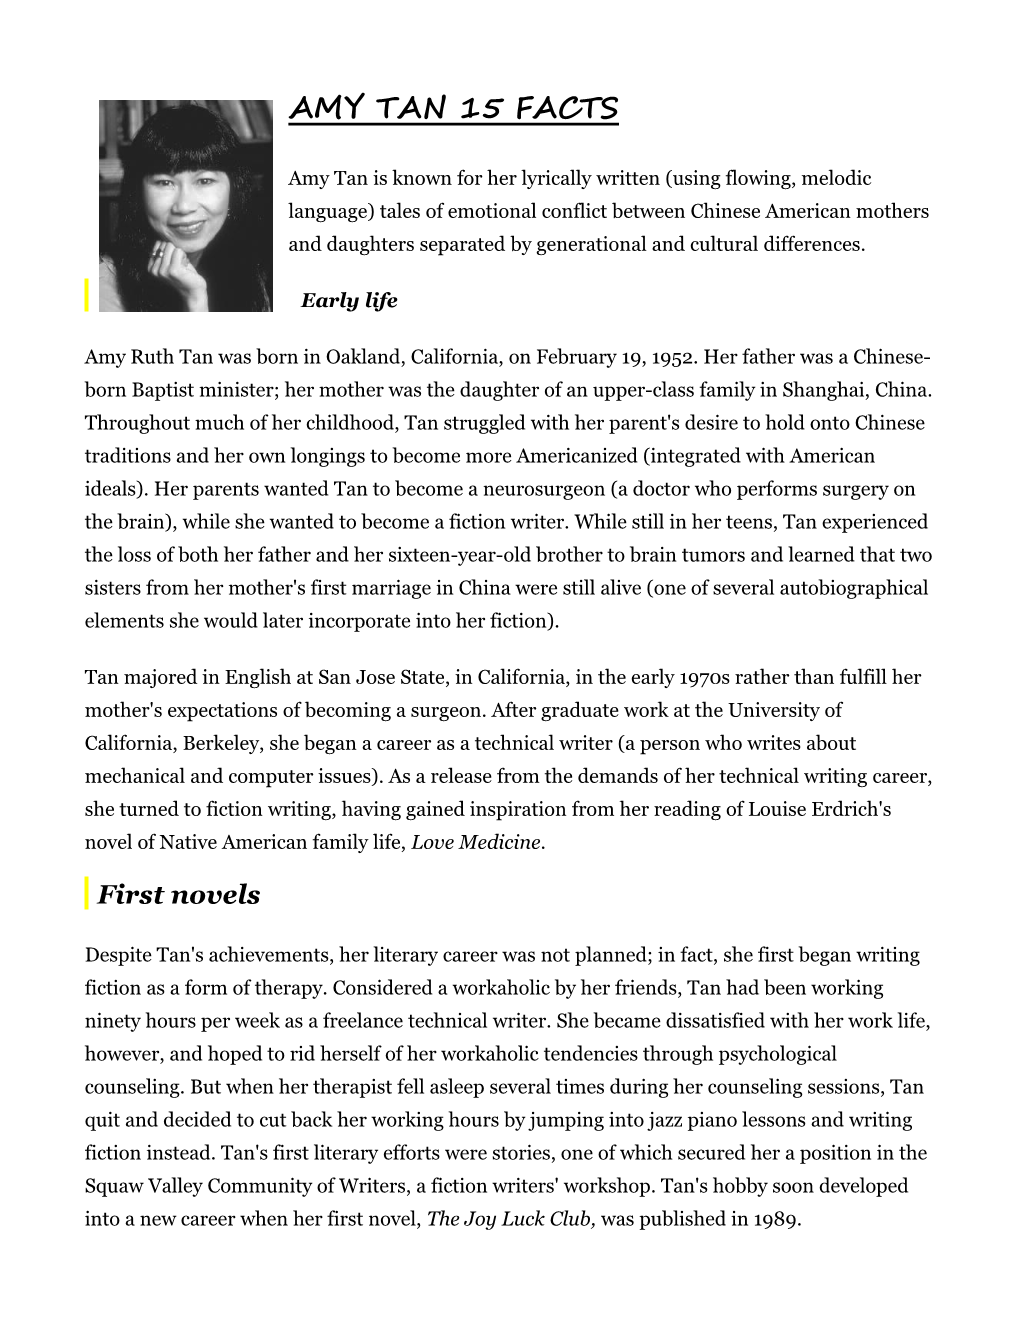 Amy Tan 15 Facts